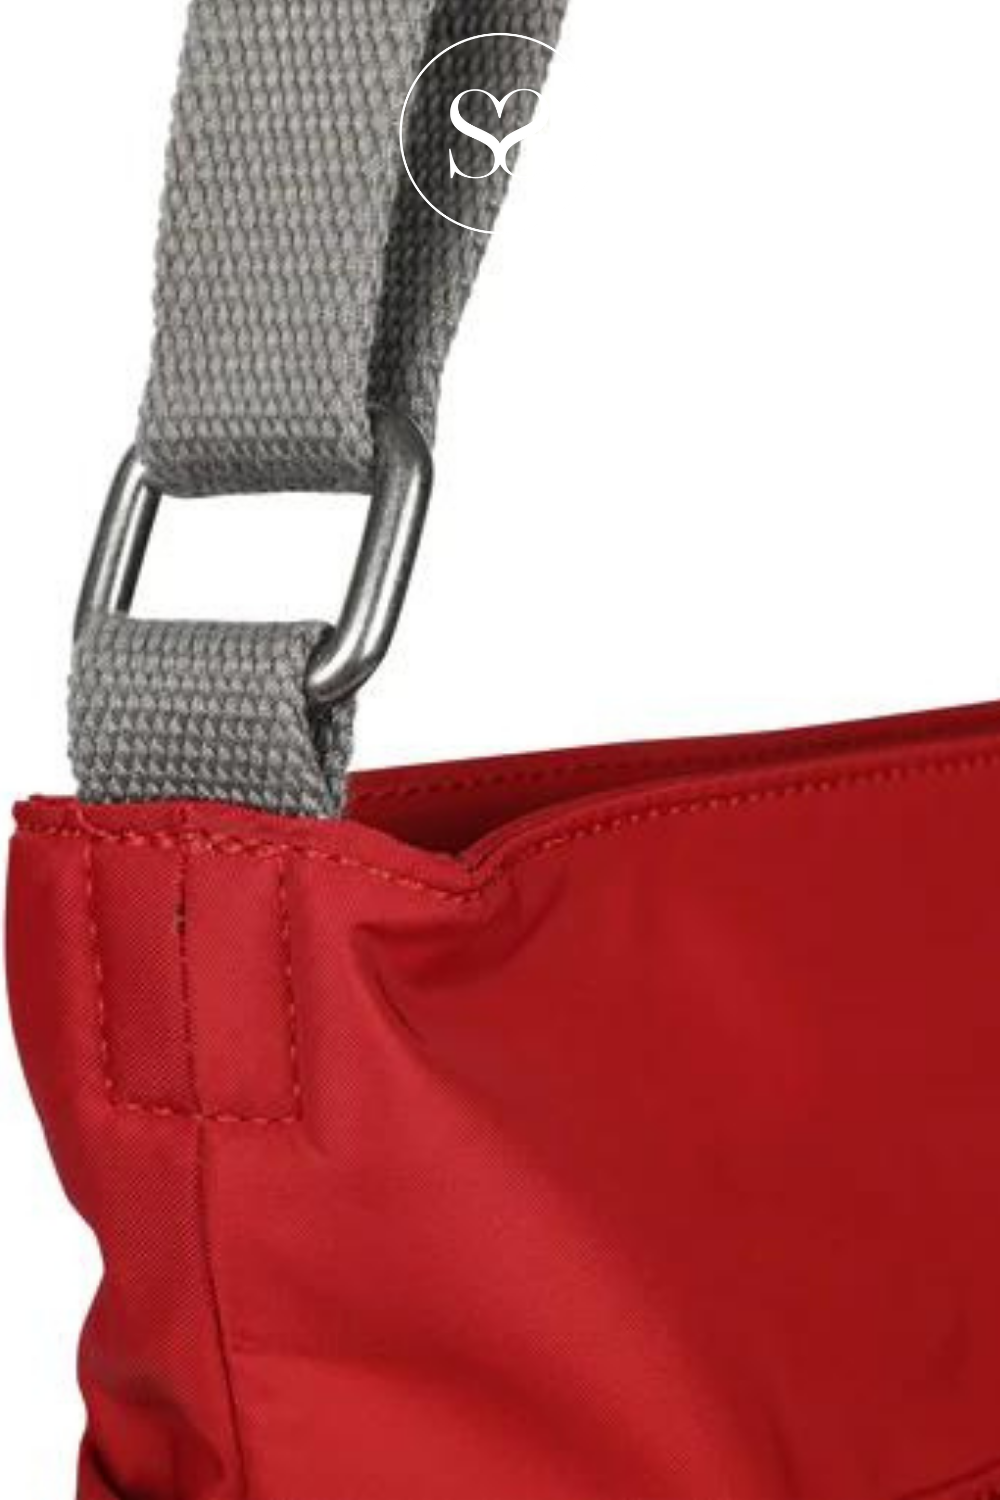 ROKA KENNINGTON WATERPROOF RED CRANBERRY CROSSBODY BAGS WITH FRONT ZIPPED POCKET